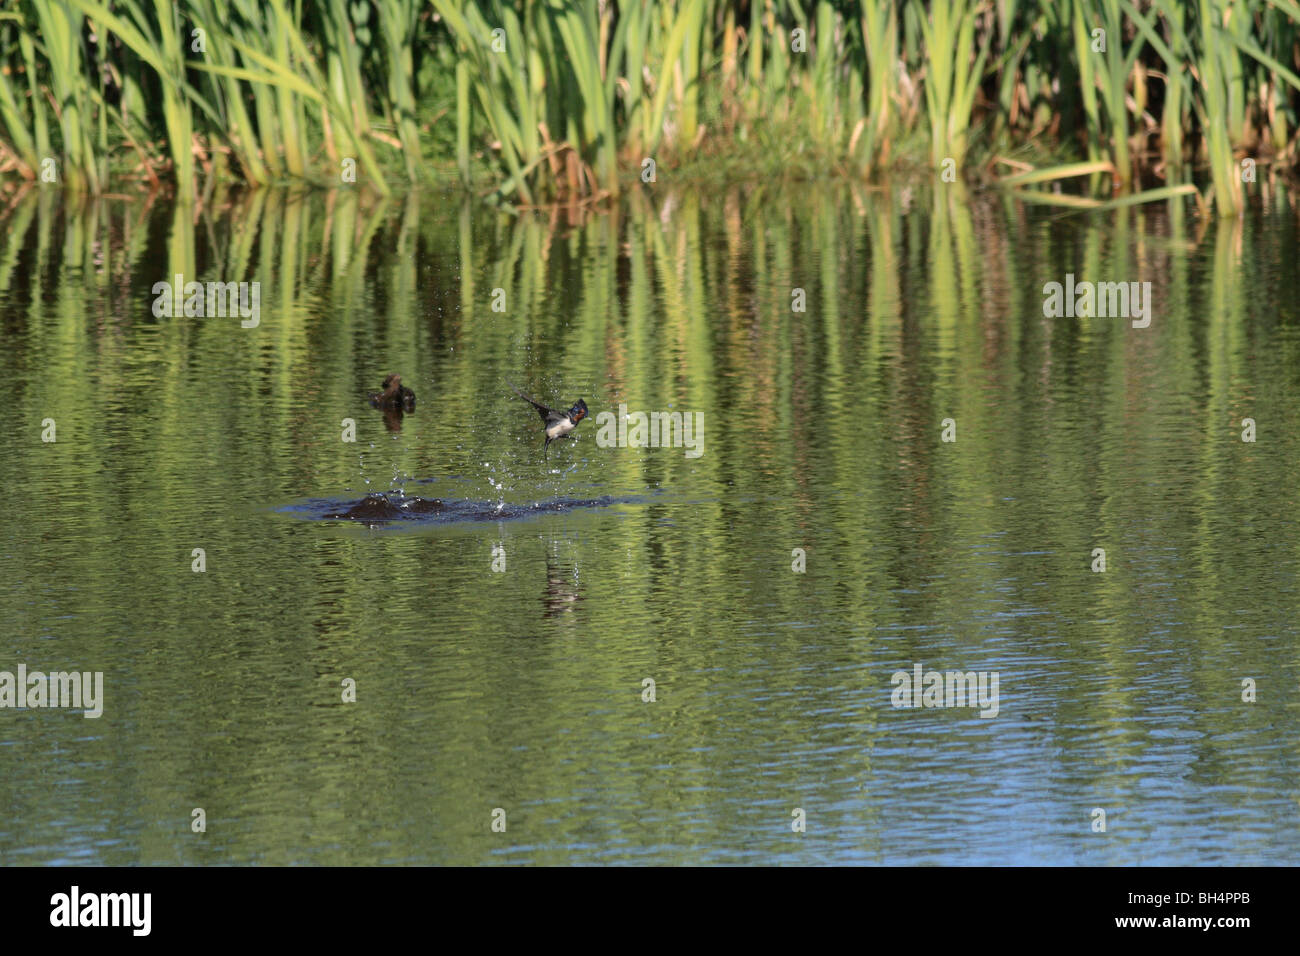 Swallow (Hirundo rustica) catching insects on surface of pond. Stock Photo